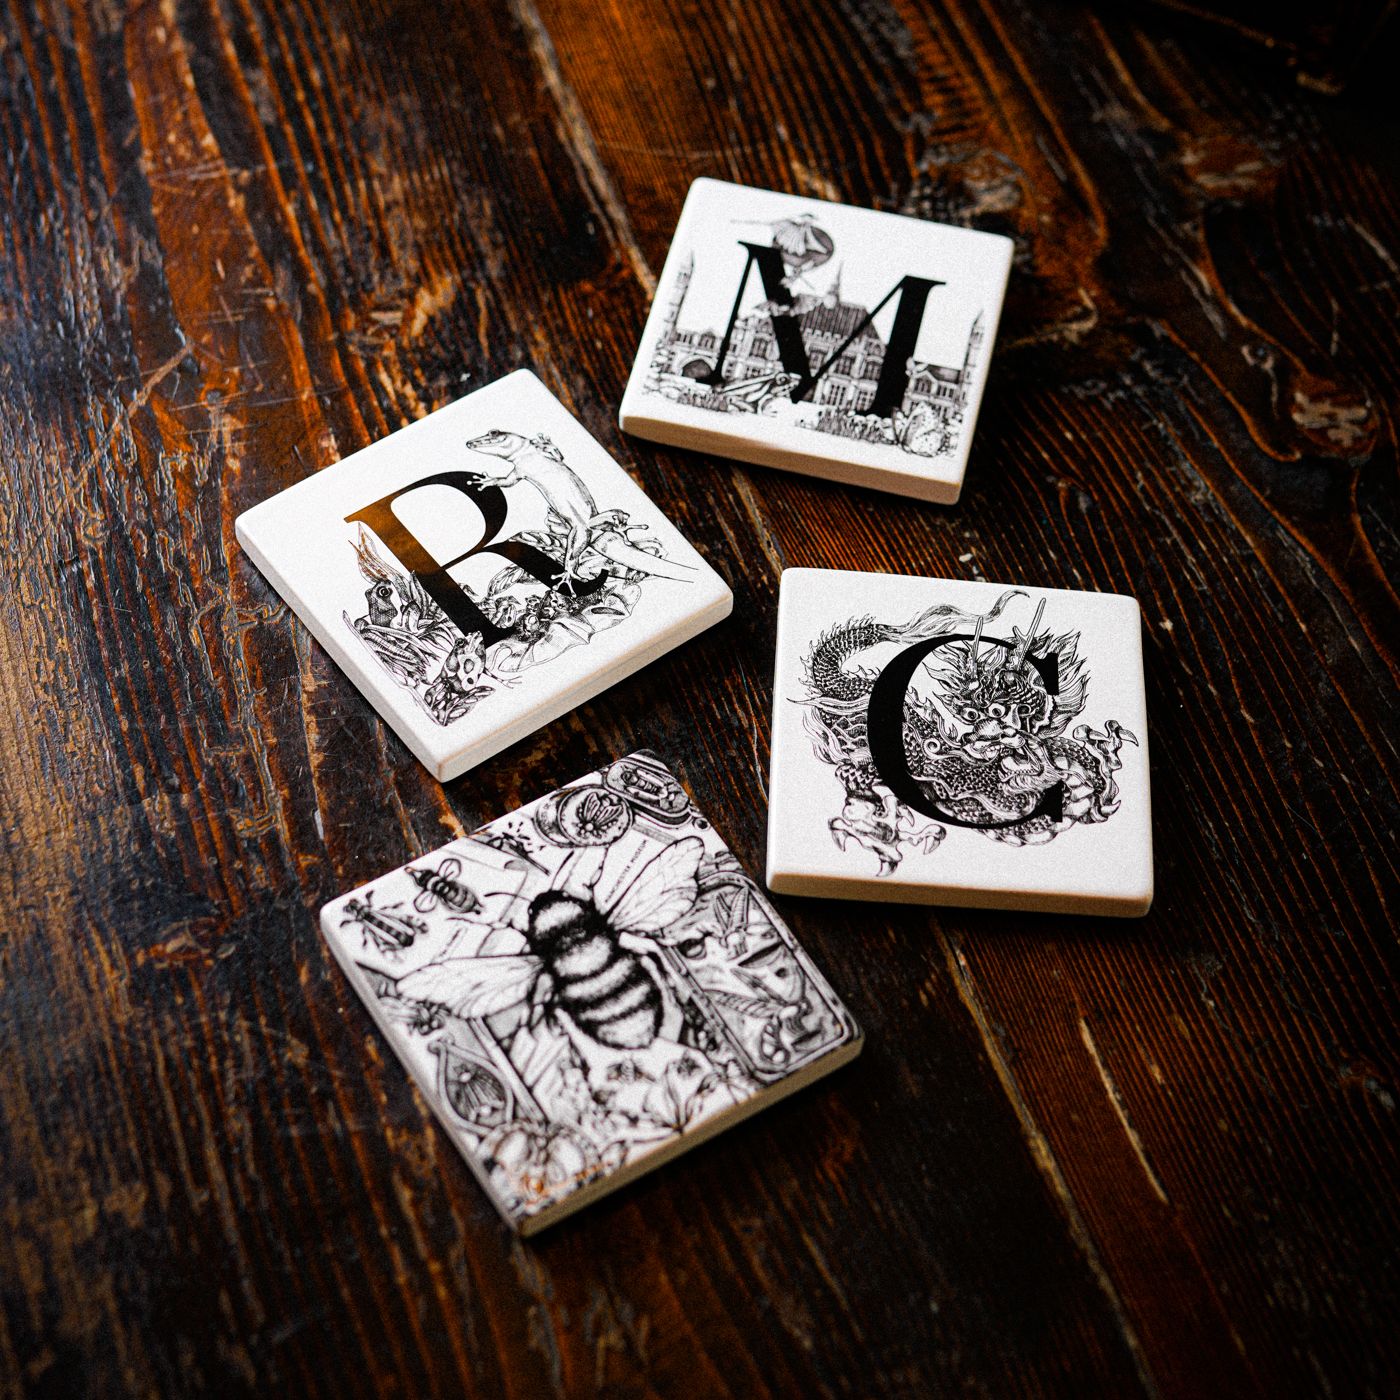 Lifestyle shot of the full four coasters from the sculpts. The M, C and R are at the top with the bee slightly out of focus near the bottom. All four coasters are resting on a dark brown wooden surface.